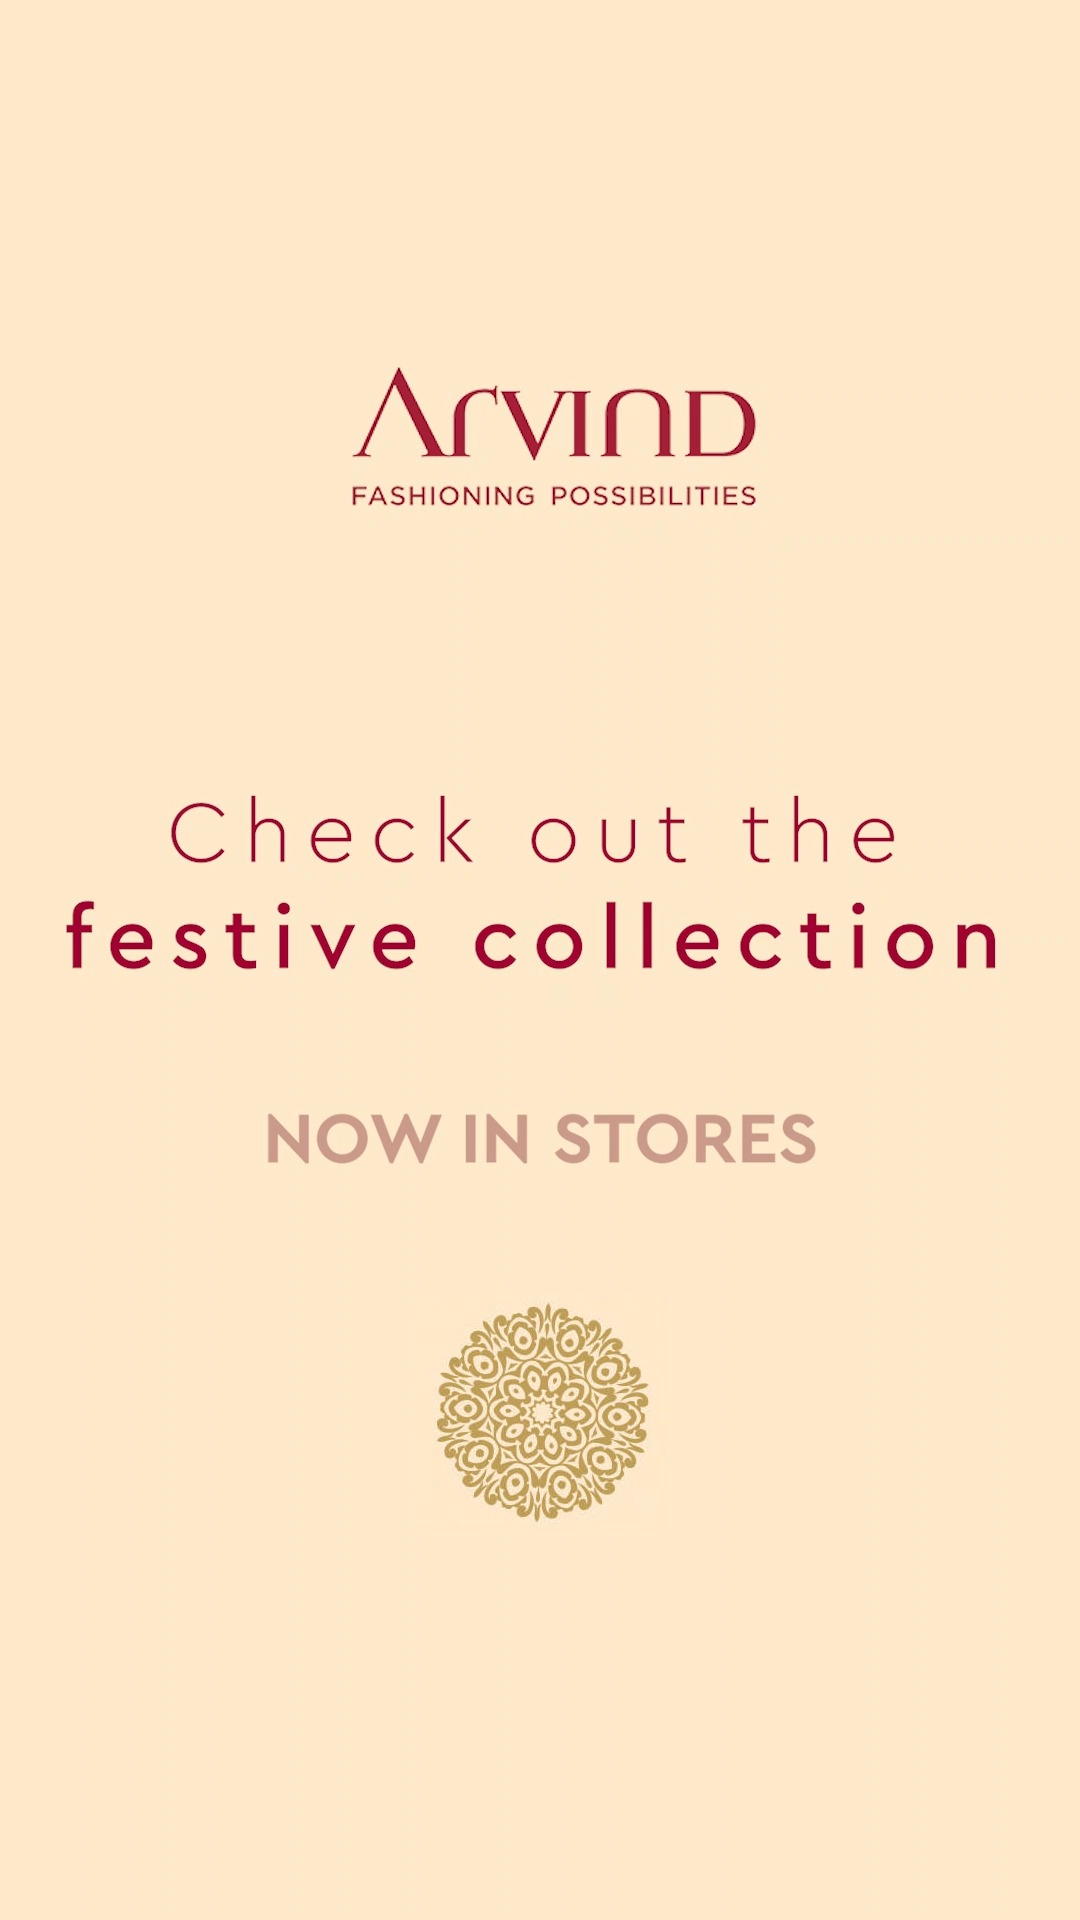 Welcome the celebrations & look your best with the #FestivalCalledIndia Collection from Arvind!

#Arvind #FashioningPossibilities #FestivalOfLights #DiwaliCollection #TraditionalOutfits #Ethnicwears #FestiveEssentials #MensWear #ClassicStyles #StyleEssentials #GentlemanStyle